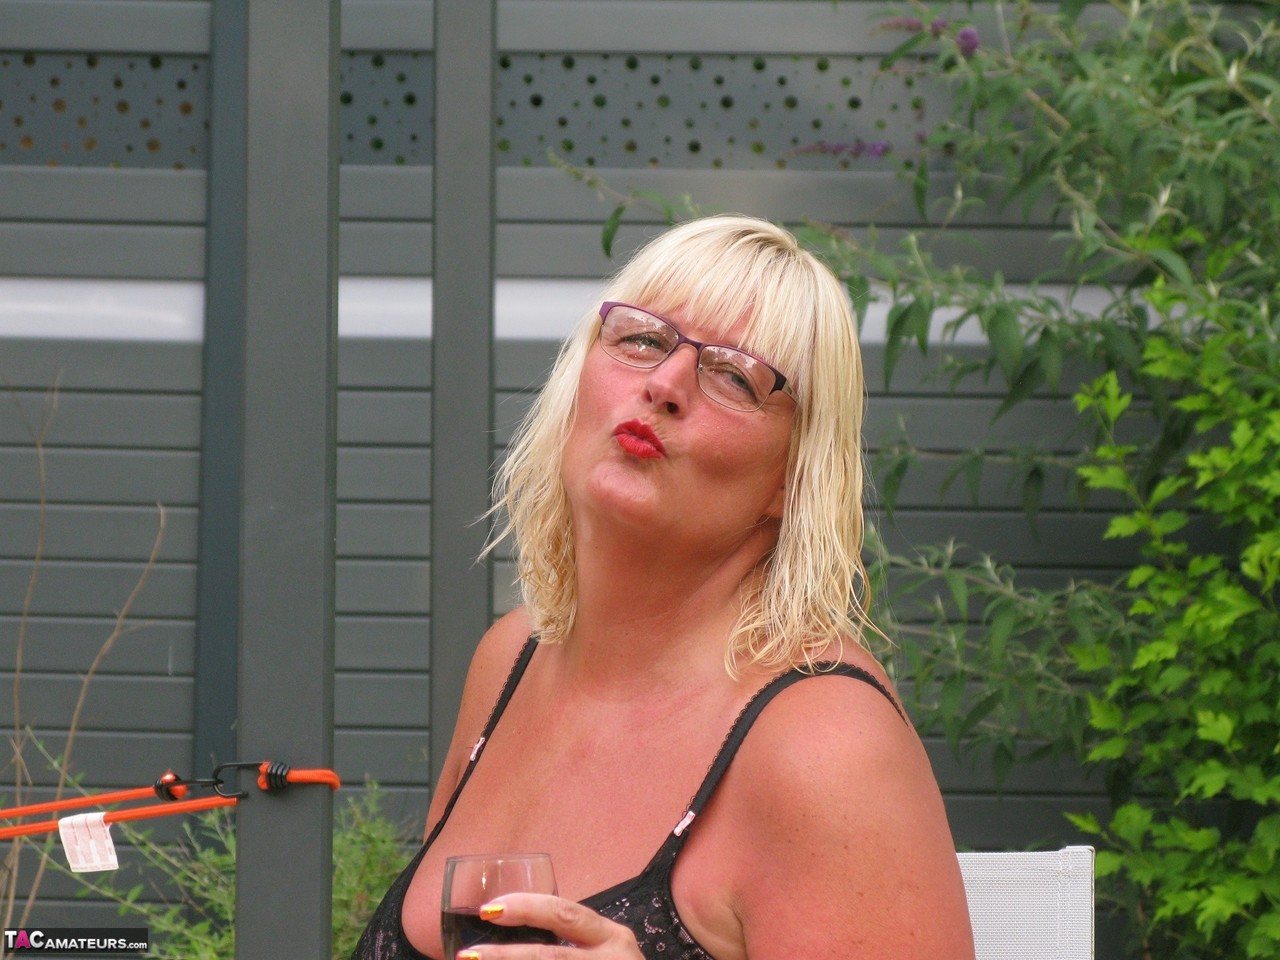 Older blonde BBW Chrissy Uk gives a BJ after going topless in a garden setting Porno-Foto #428341424